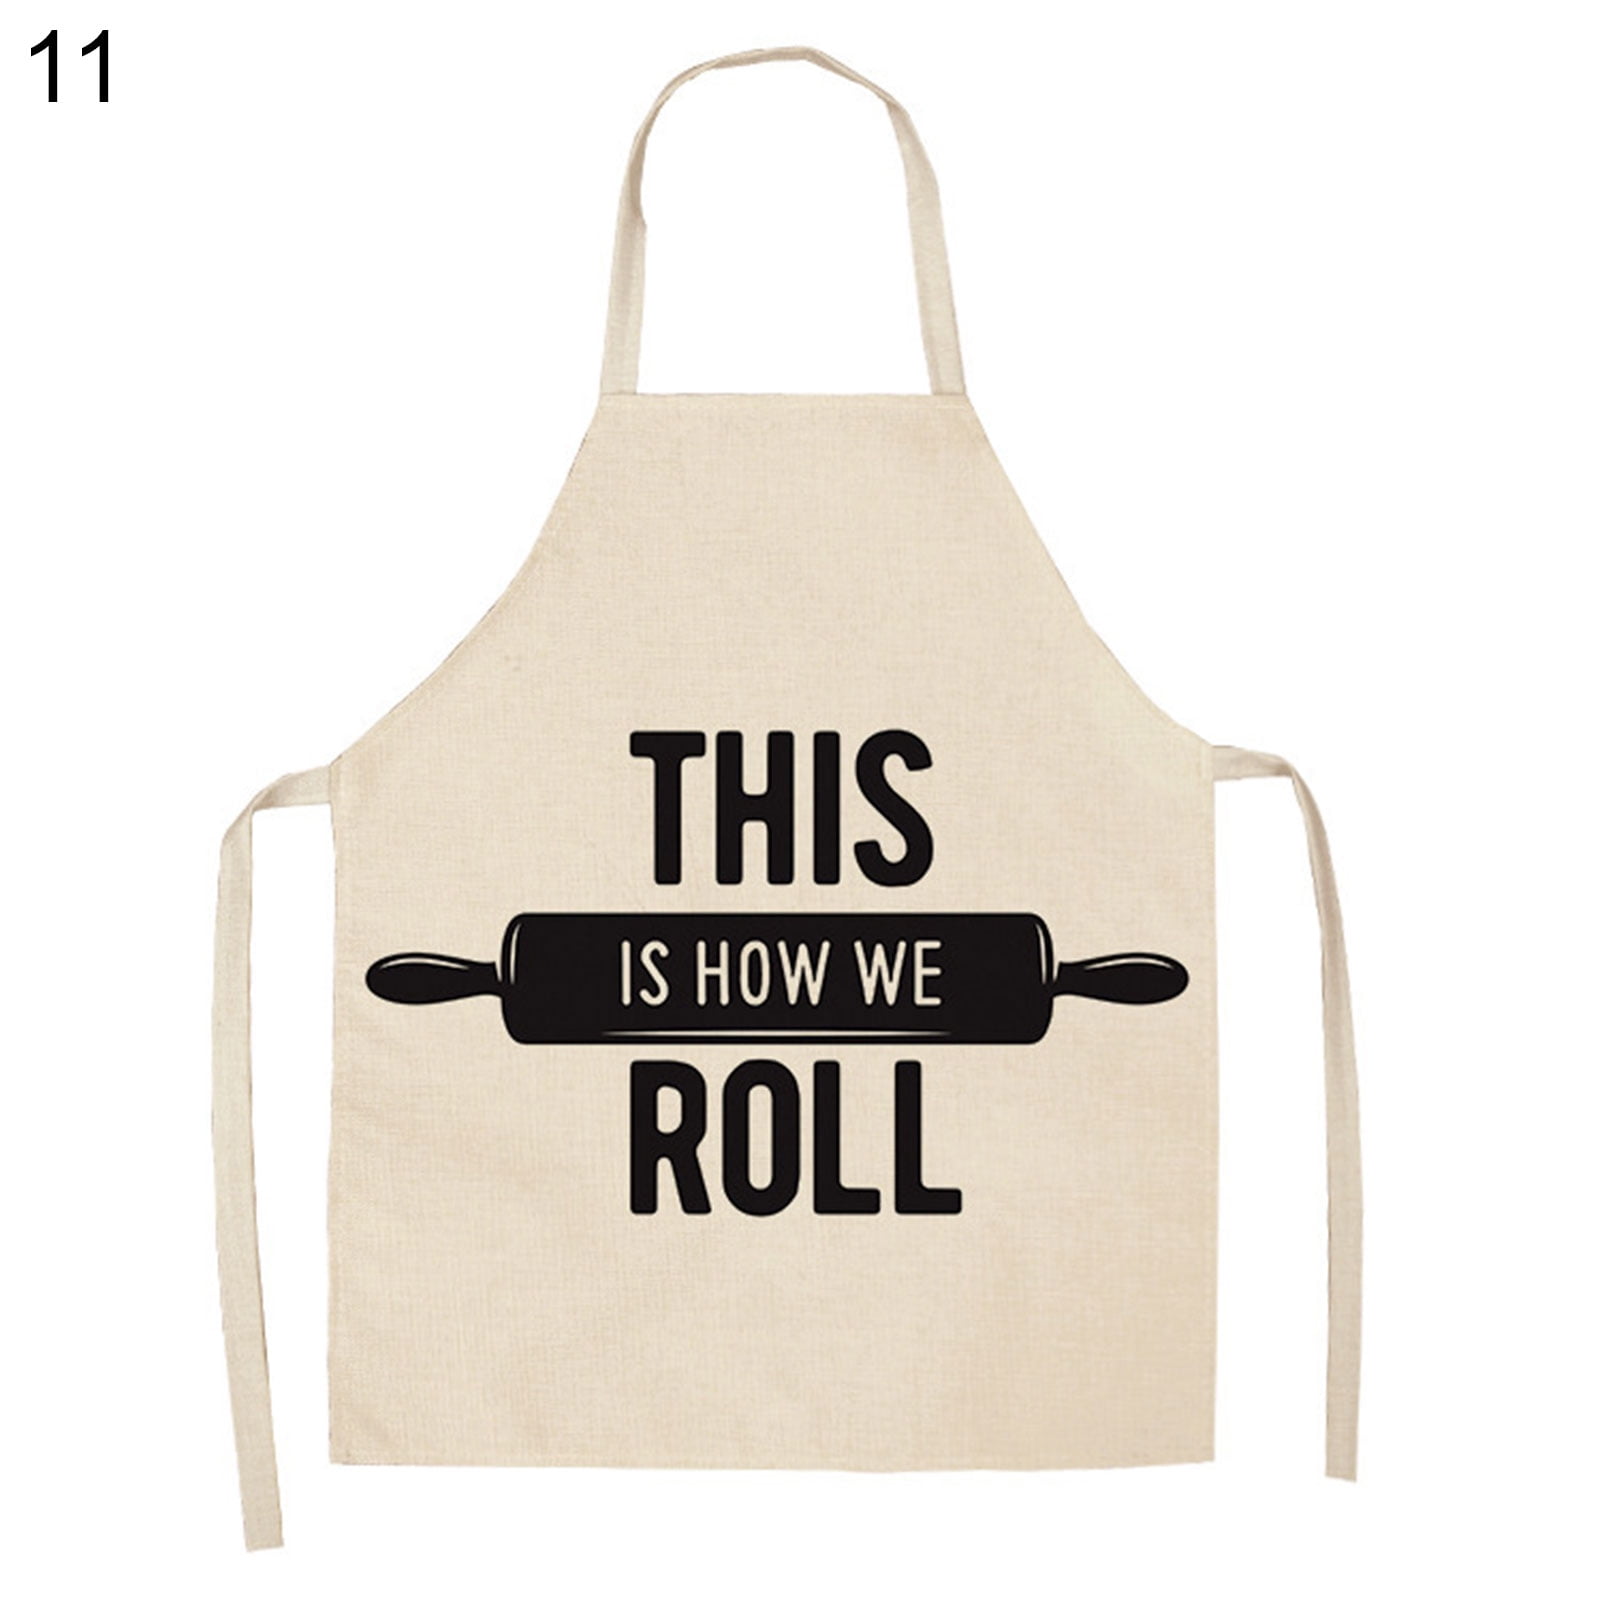 Details about   Personalised Apron Your Text Any Name Baking Kitchen Restaurant Aprons 